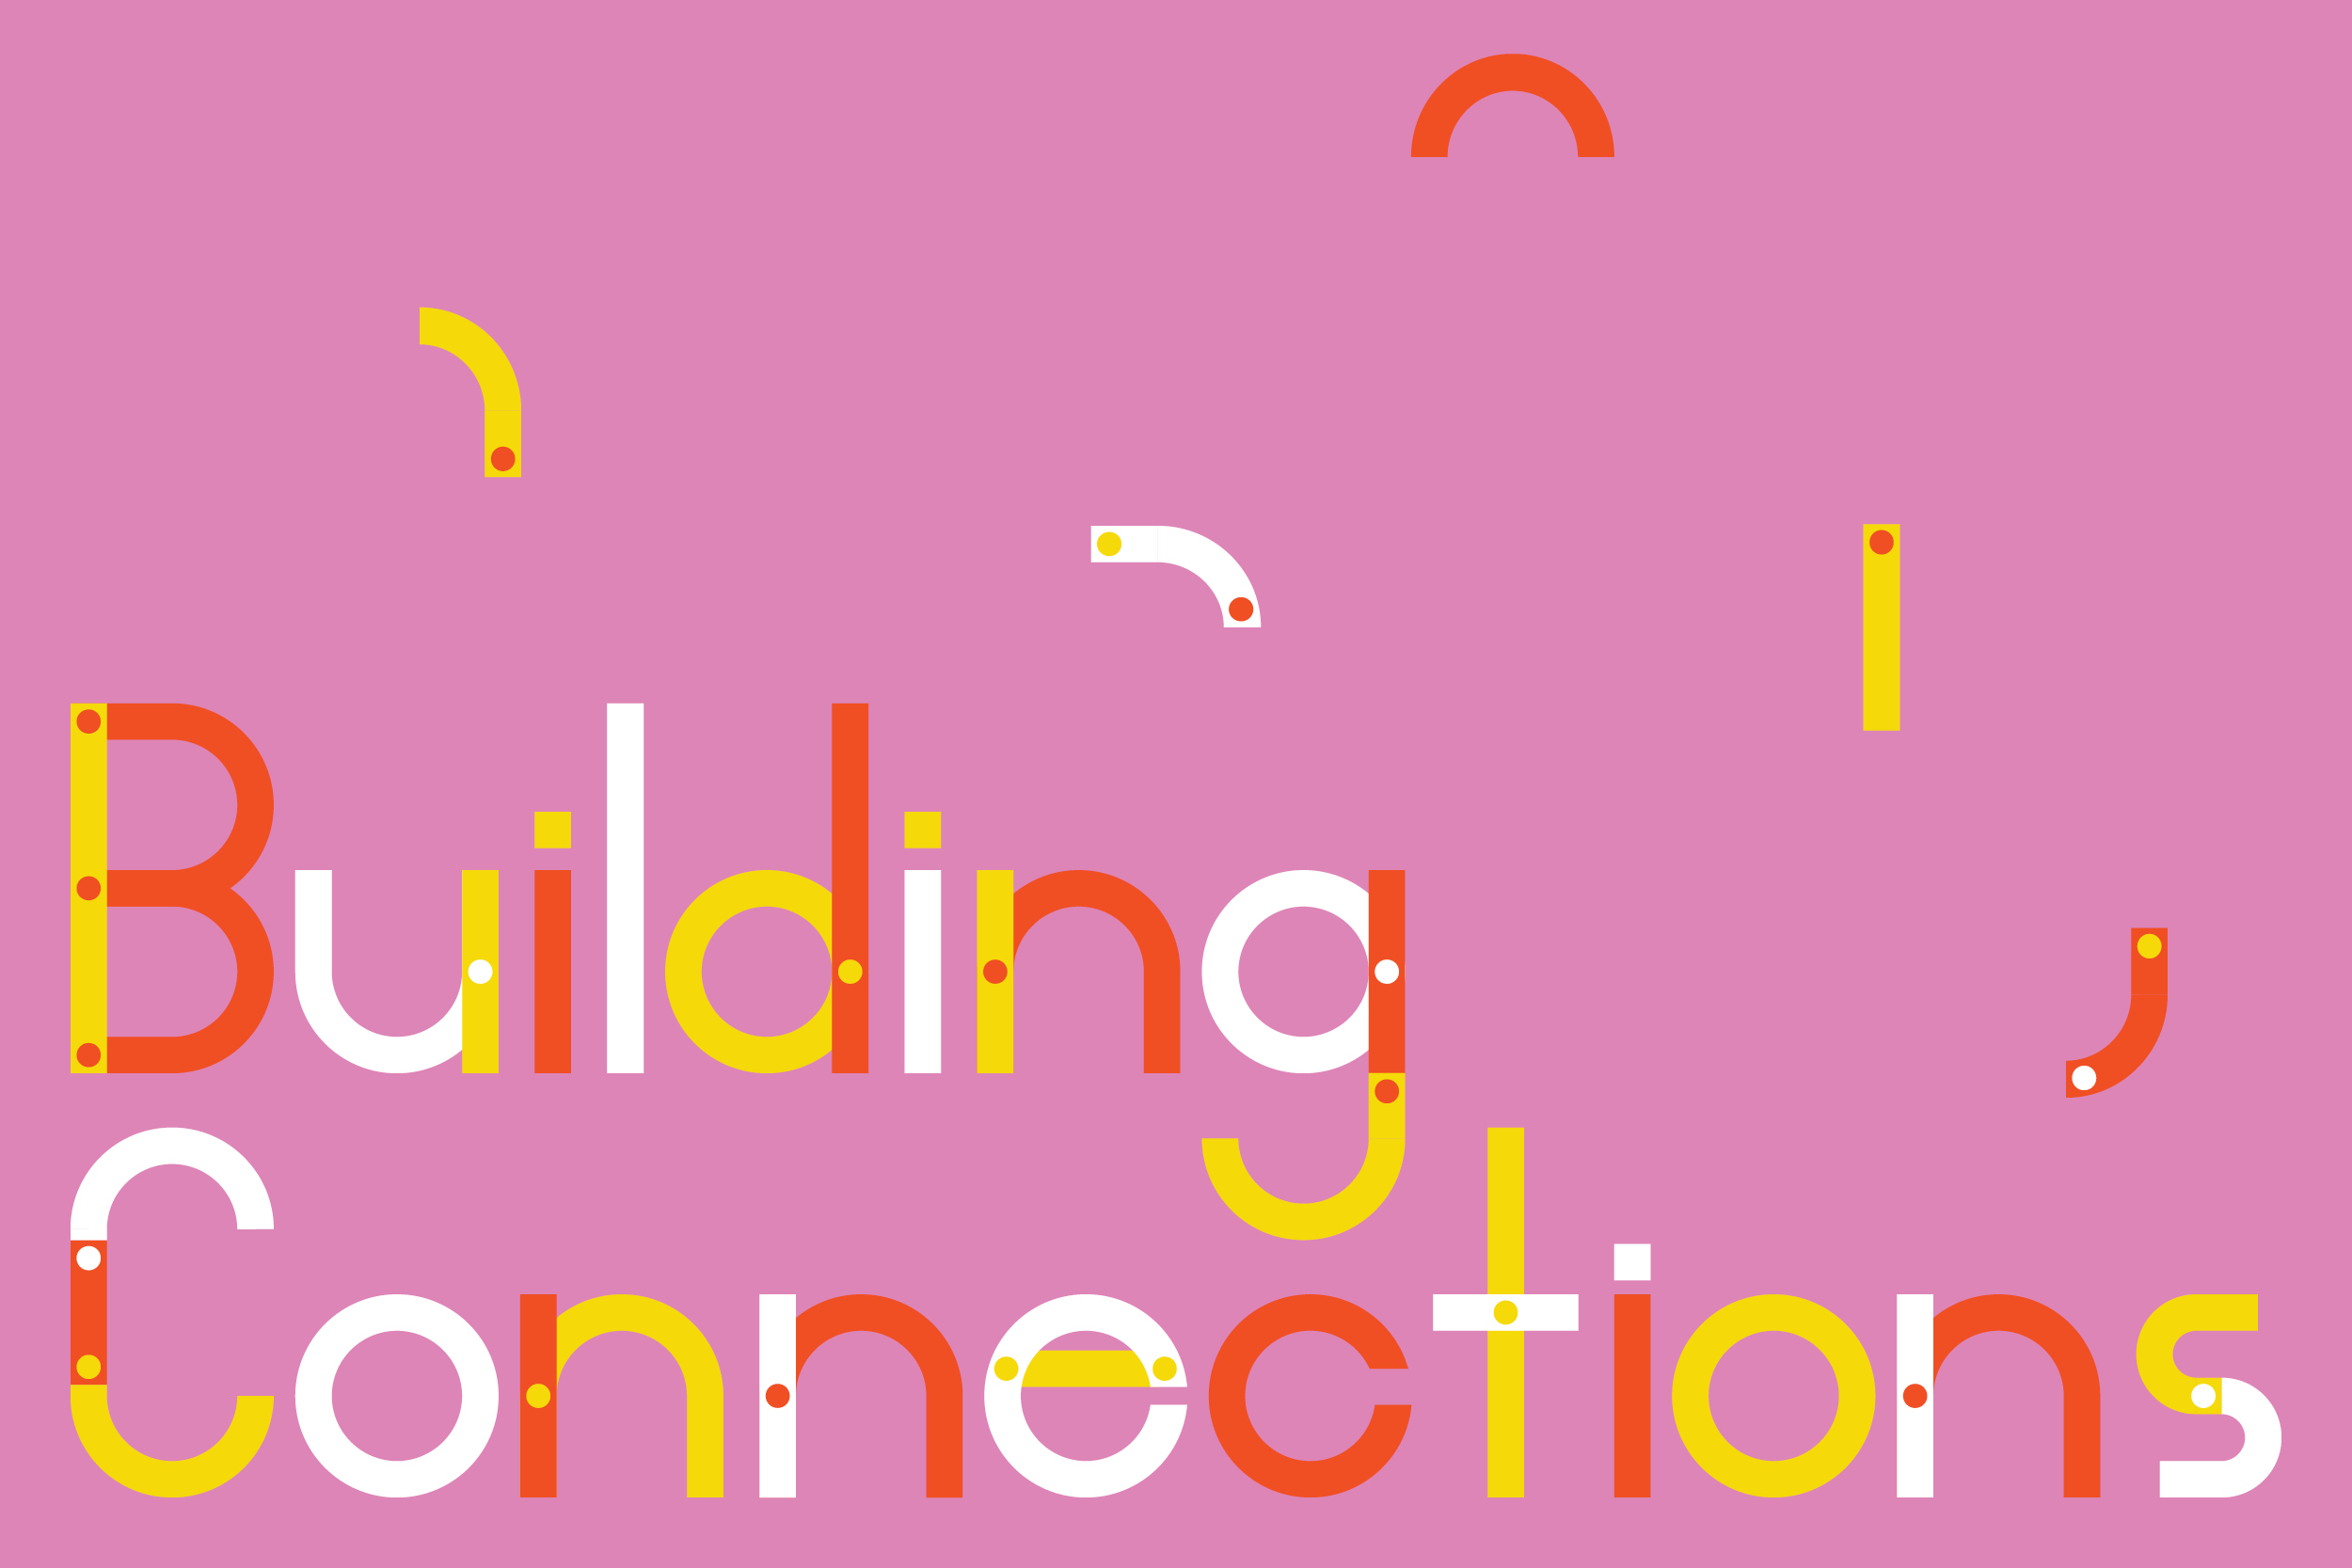 Logo of Building Connections with multicolor font on a pink background